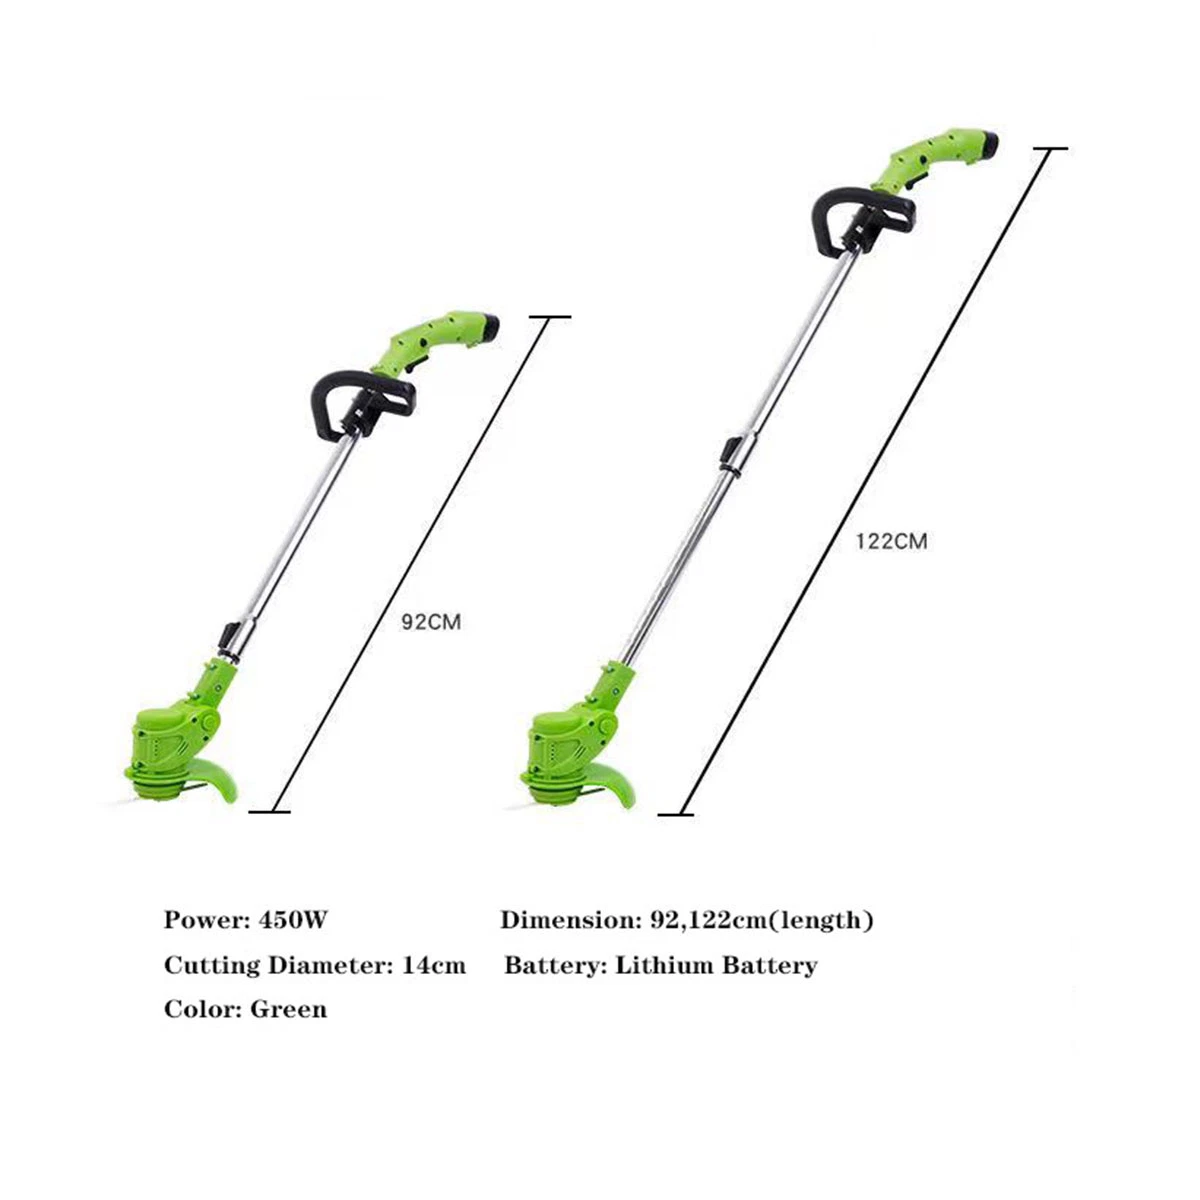 2021 The Best Popular Rechargeable Cordless Garden Tree Trimmer Tools Multifunctional Lightweight Electric Grass Brush Cutter